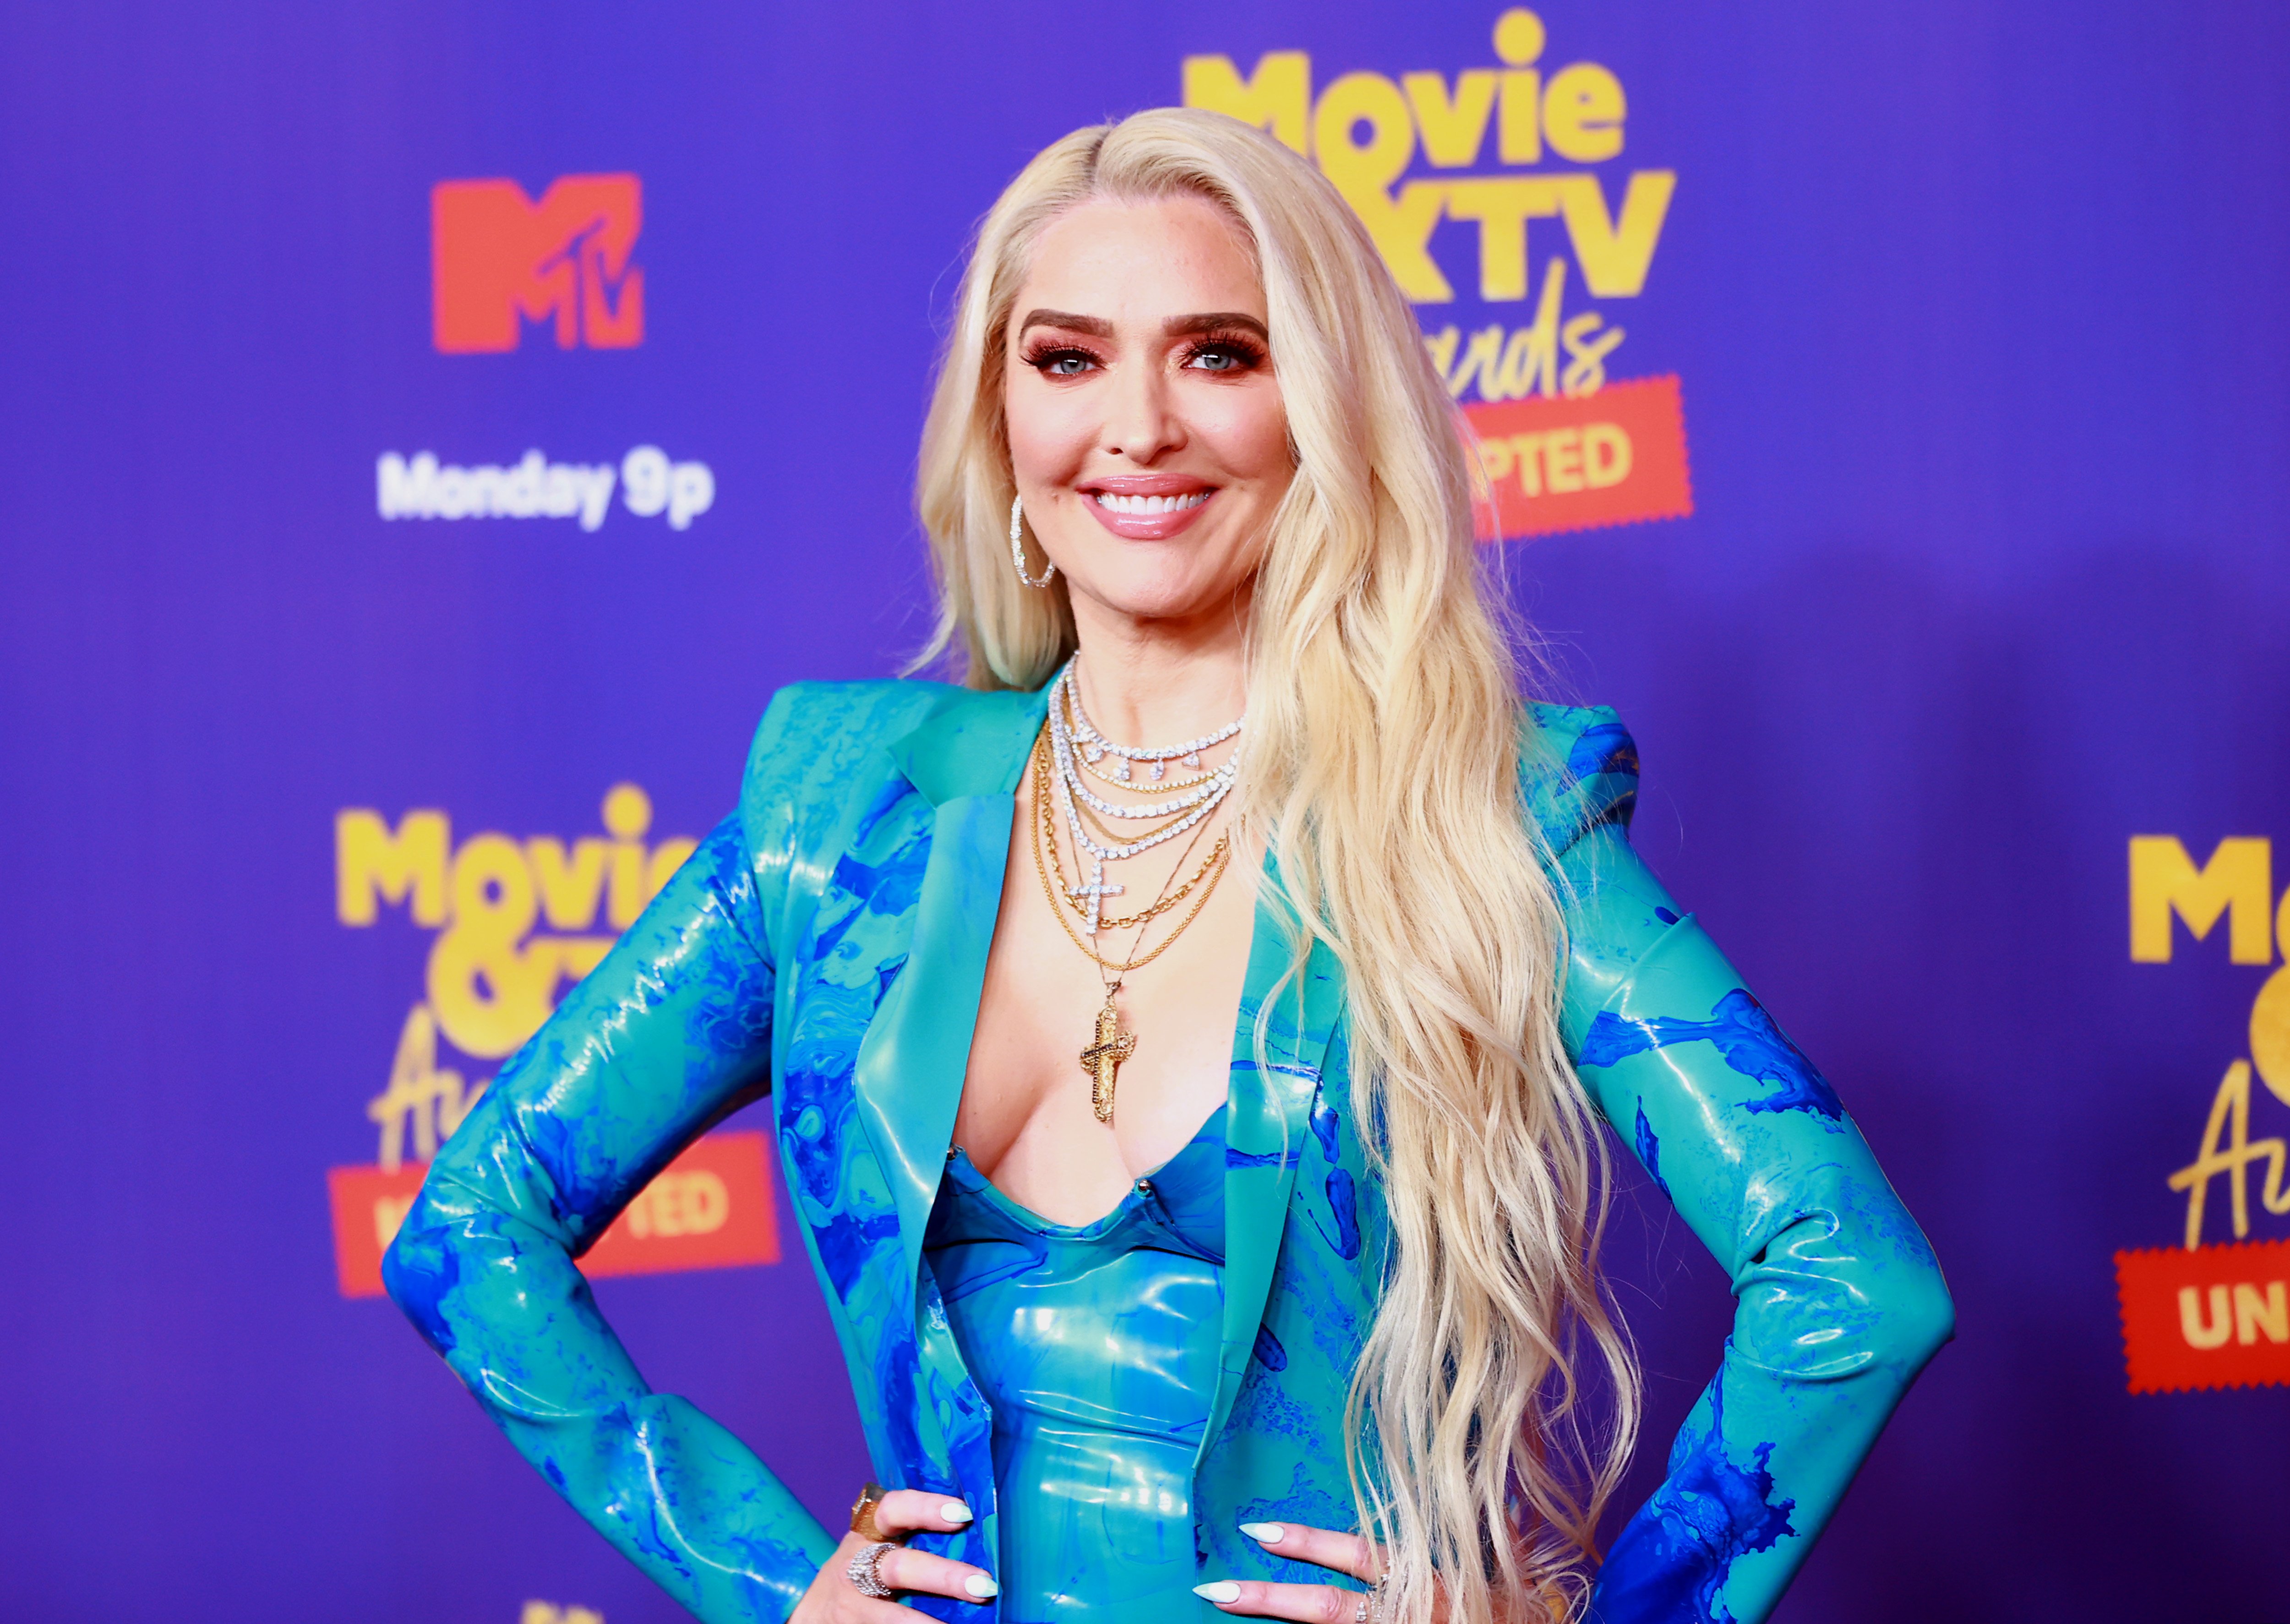 Erika Jayne posing for the cameras during the red carpet at the 2021 MTV Movie & TV Awards